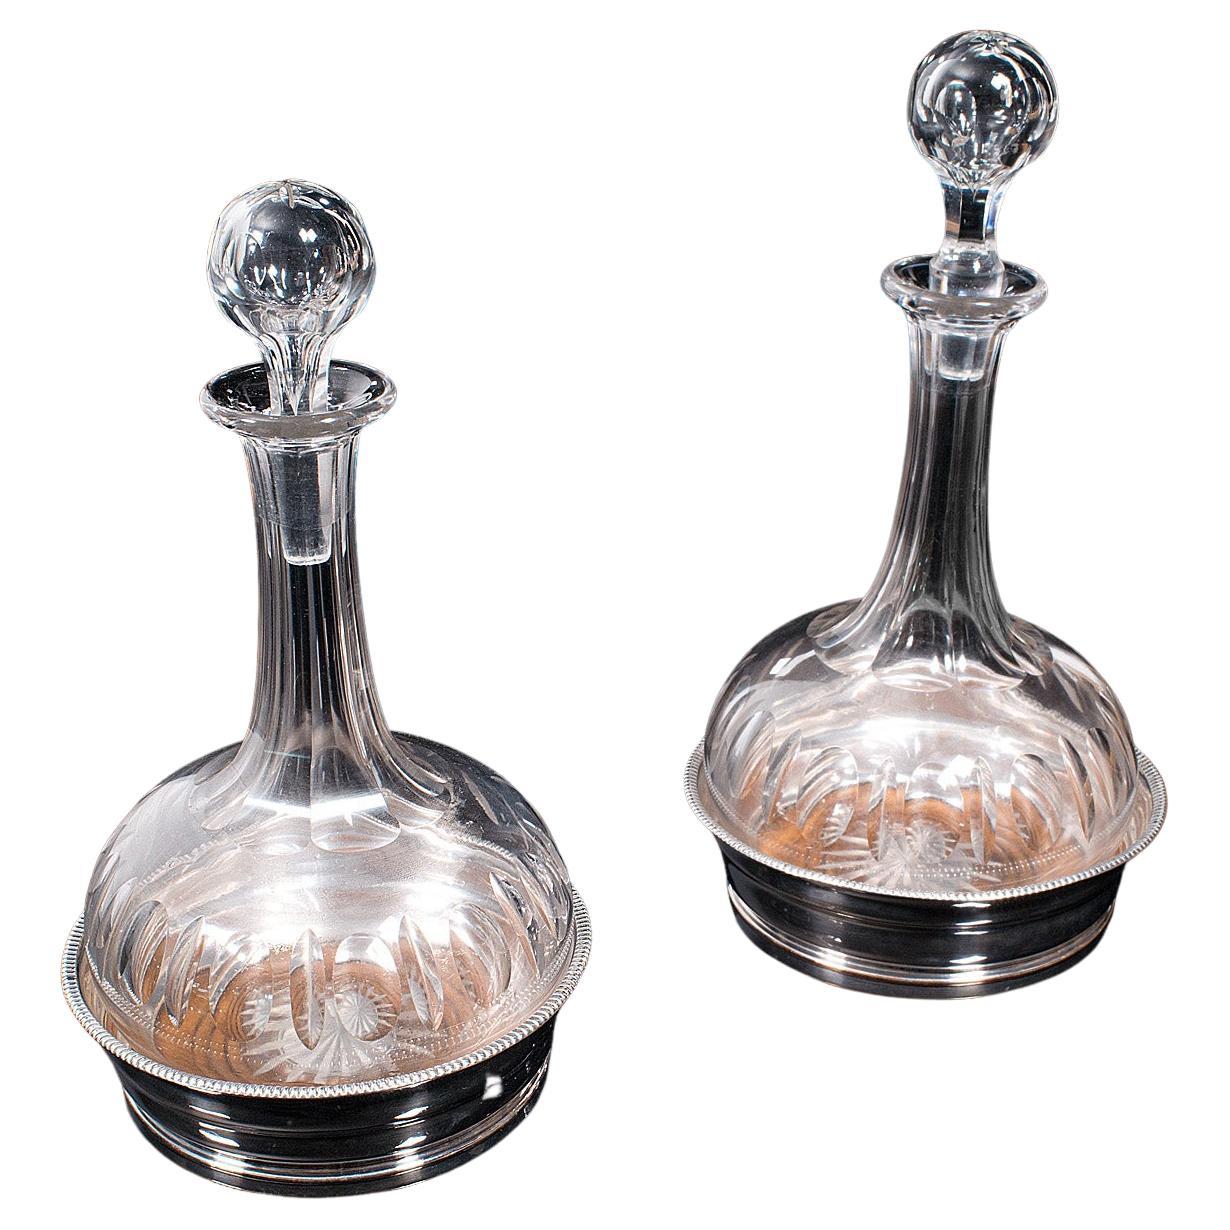 Pair of Antique Decanters and Stands, English, Silver Plate, Edwardian, C.1910 For Sale